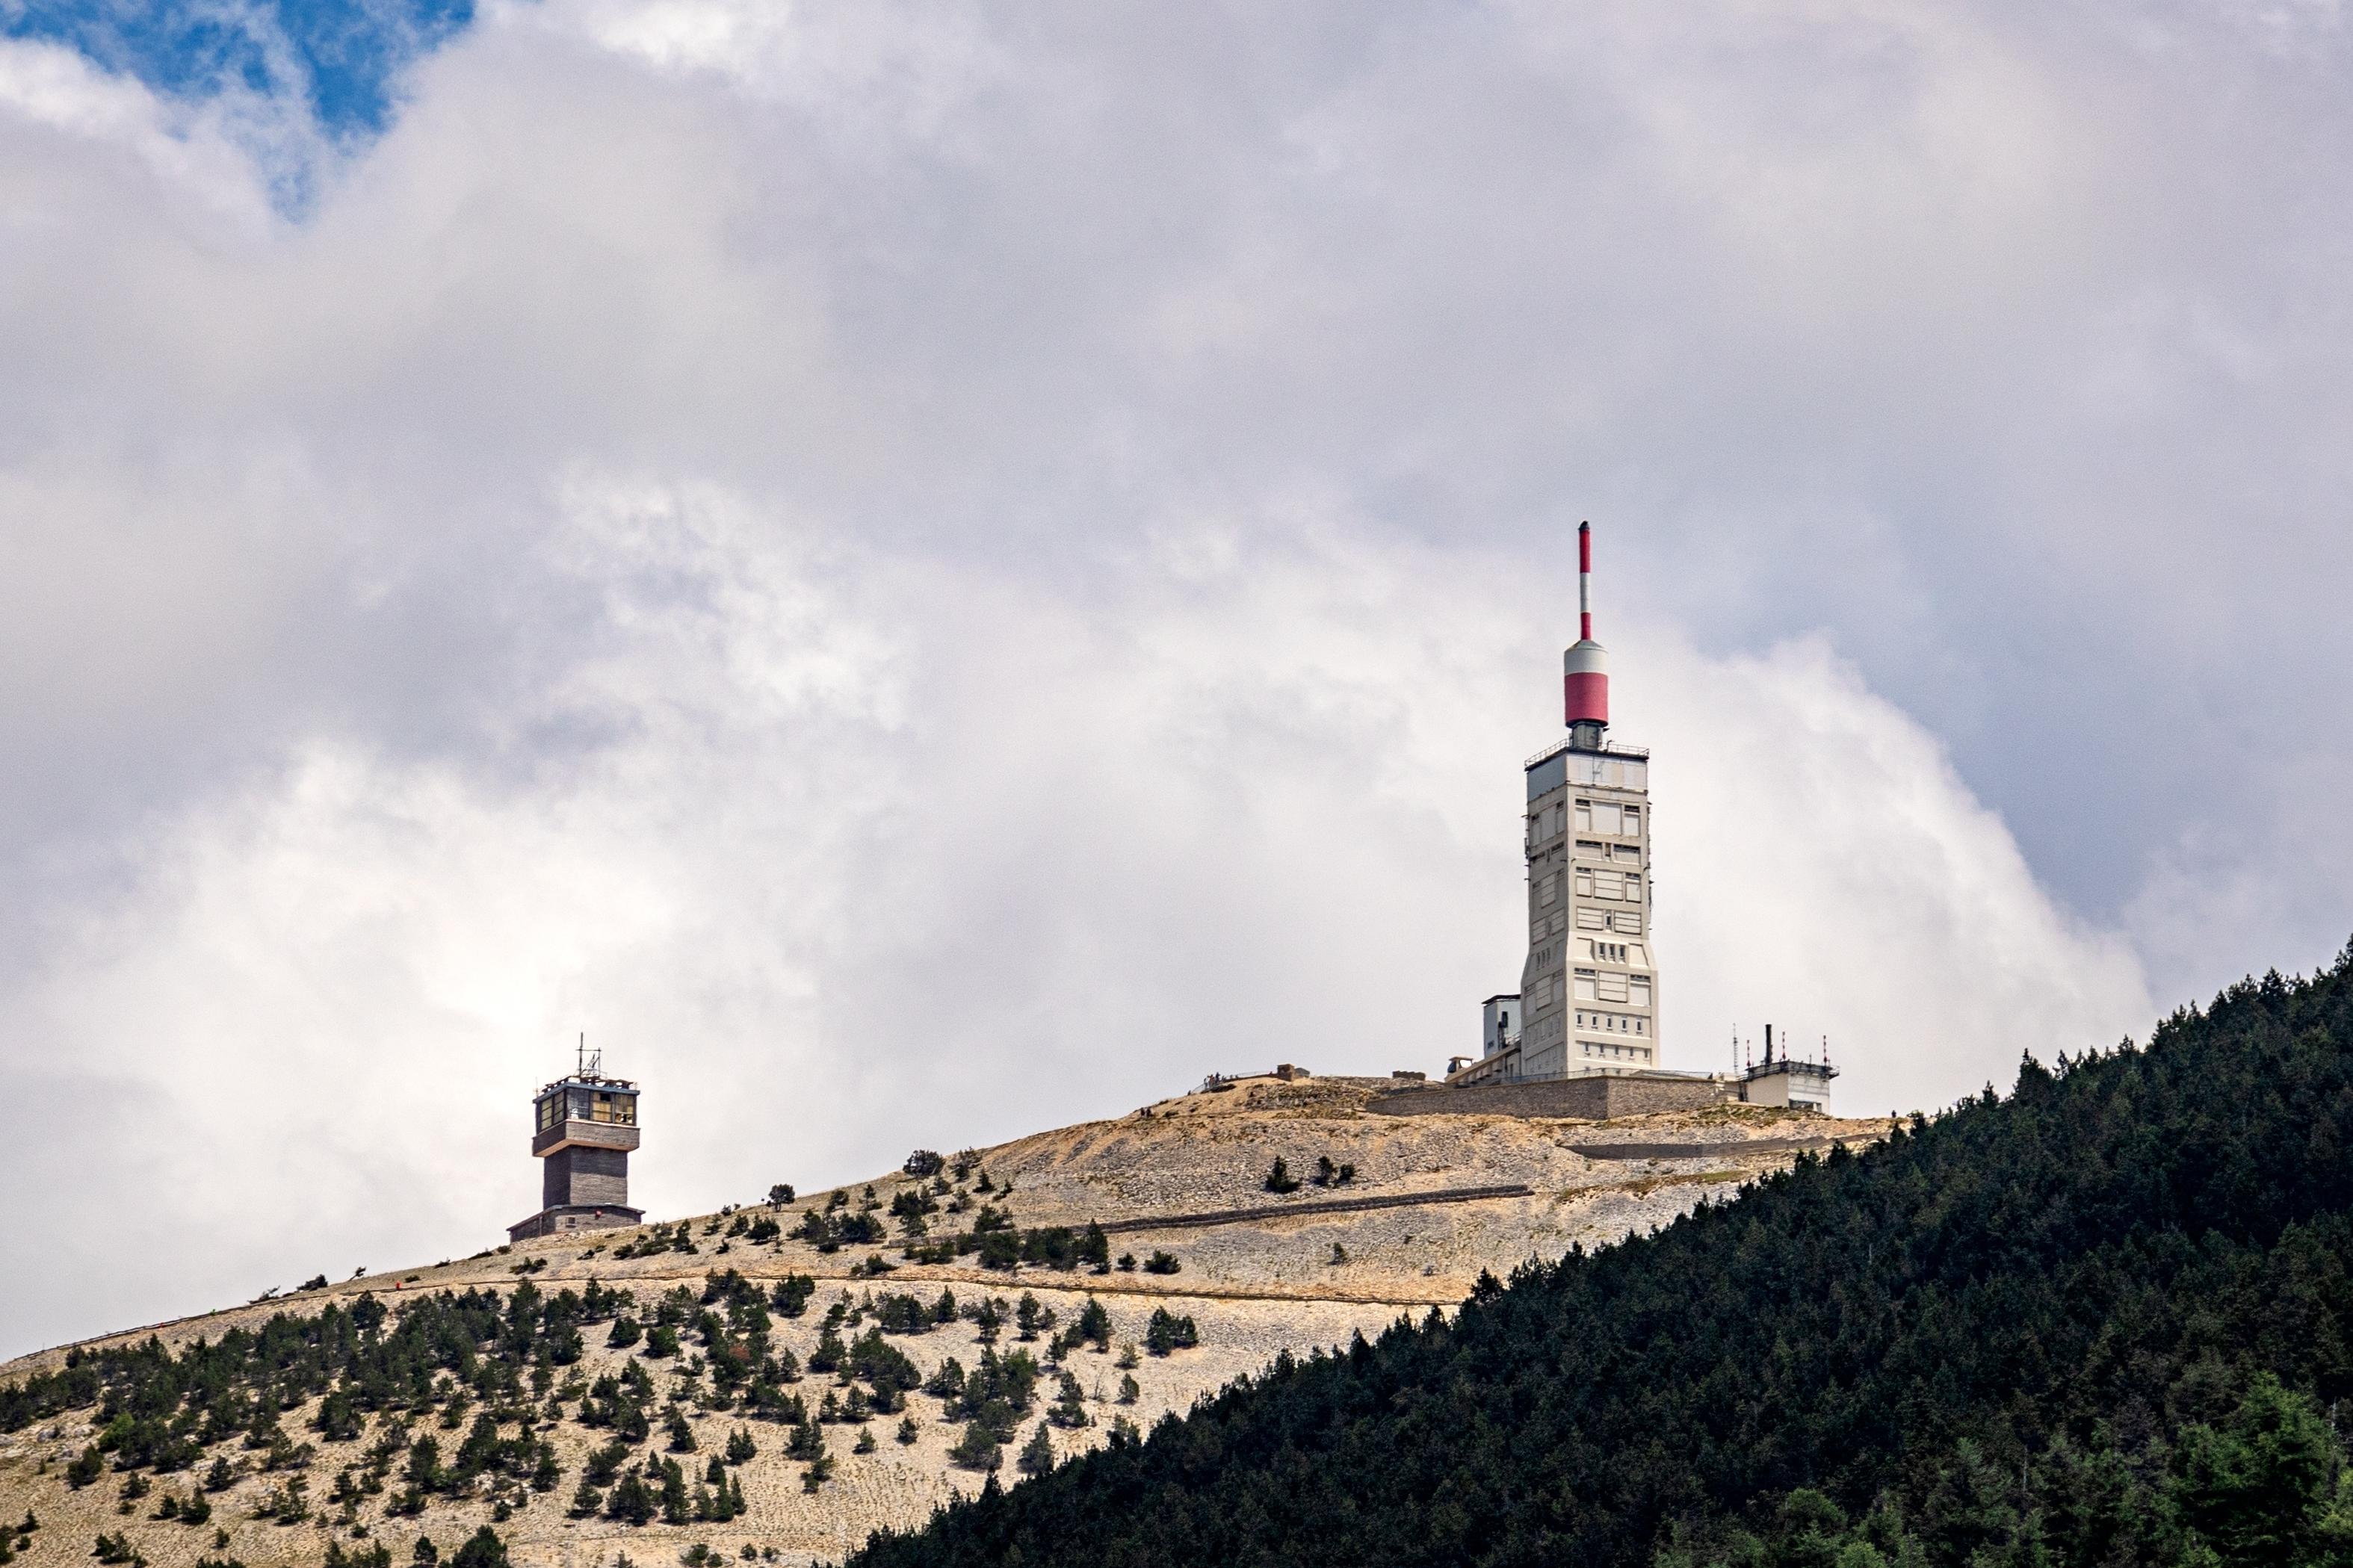 Weather station at the top of Mont Ventoux